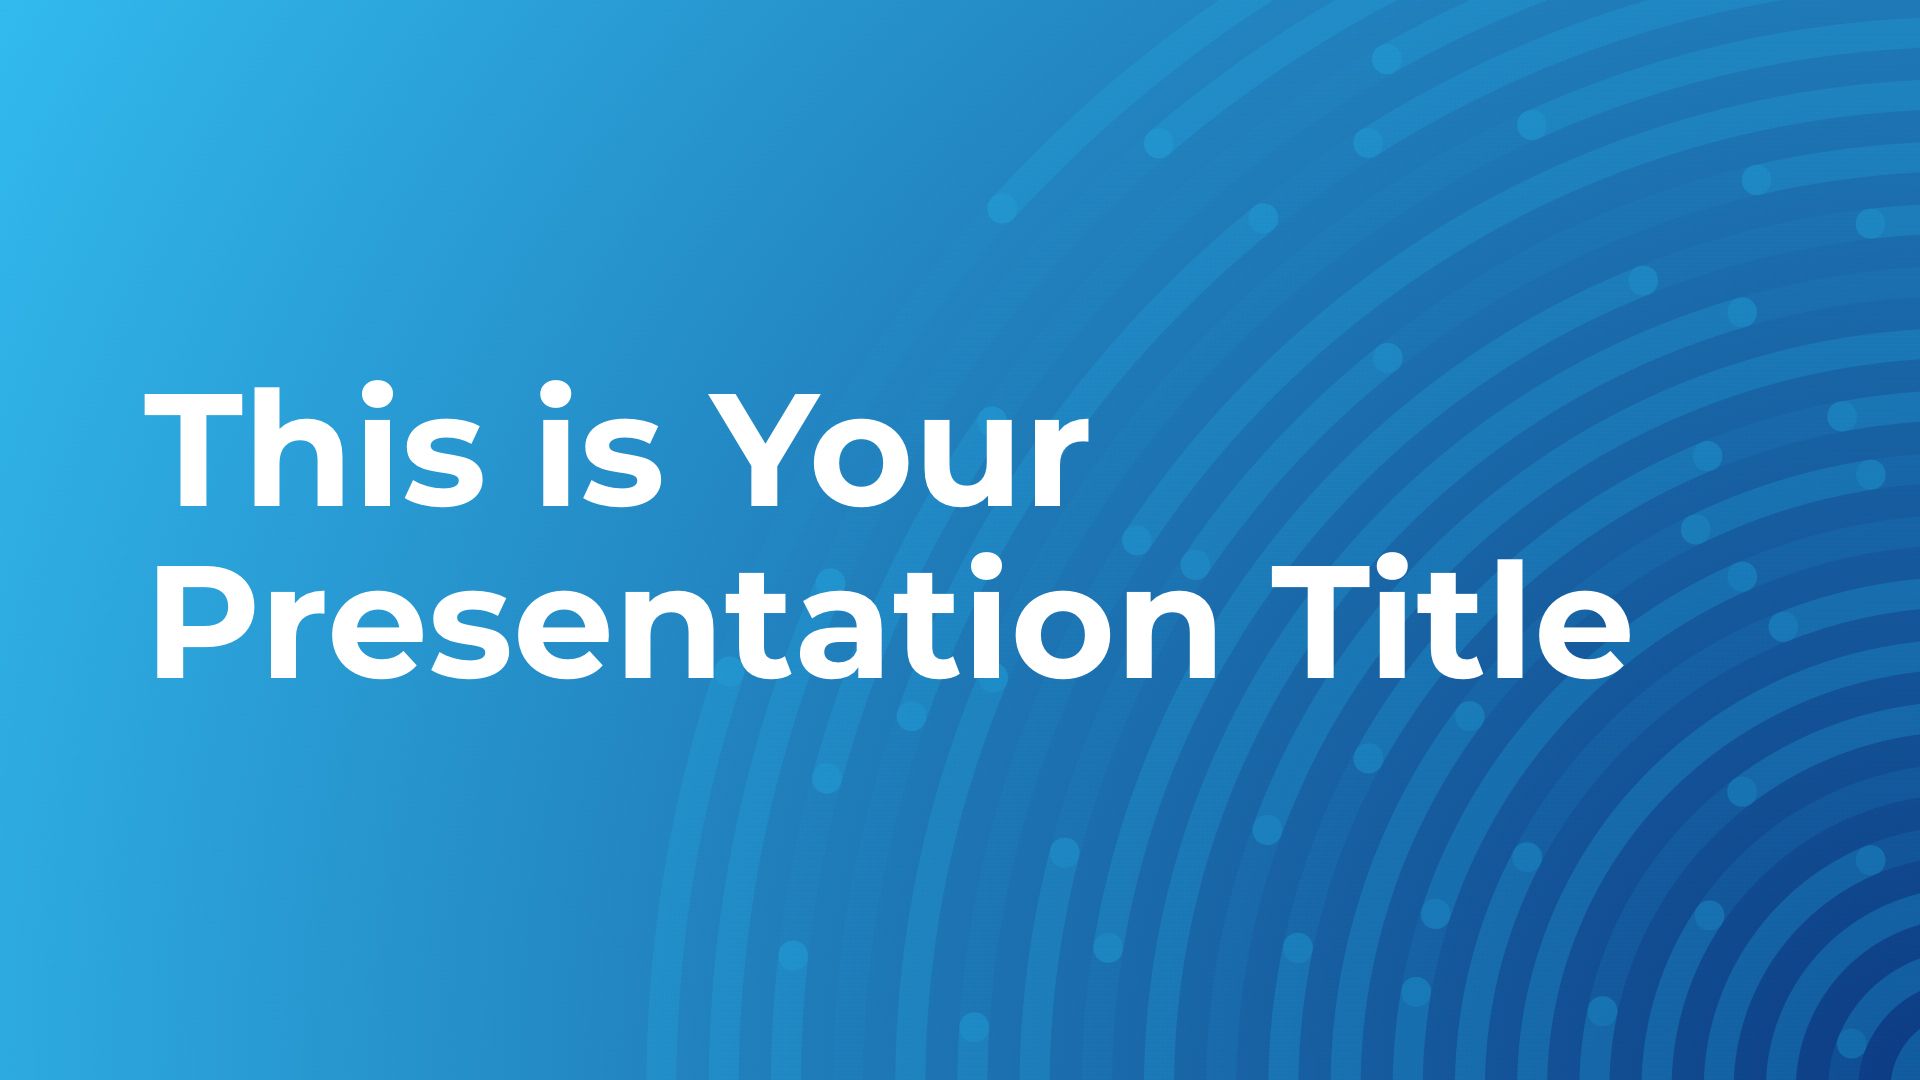 Top 10 Best Free Powerpoint Templates For 2022 That Will Wow Your Audience  – Slidescarnival